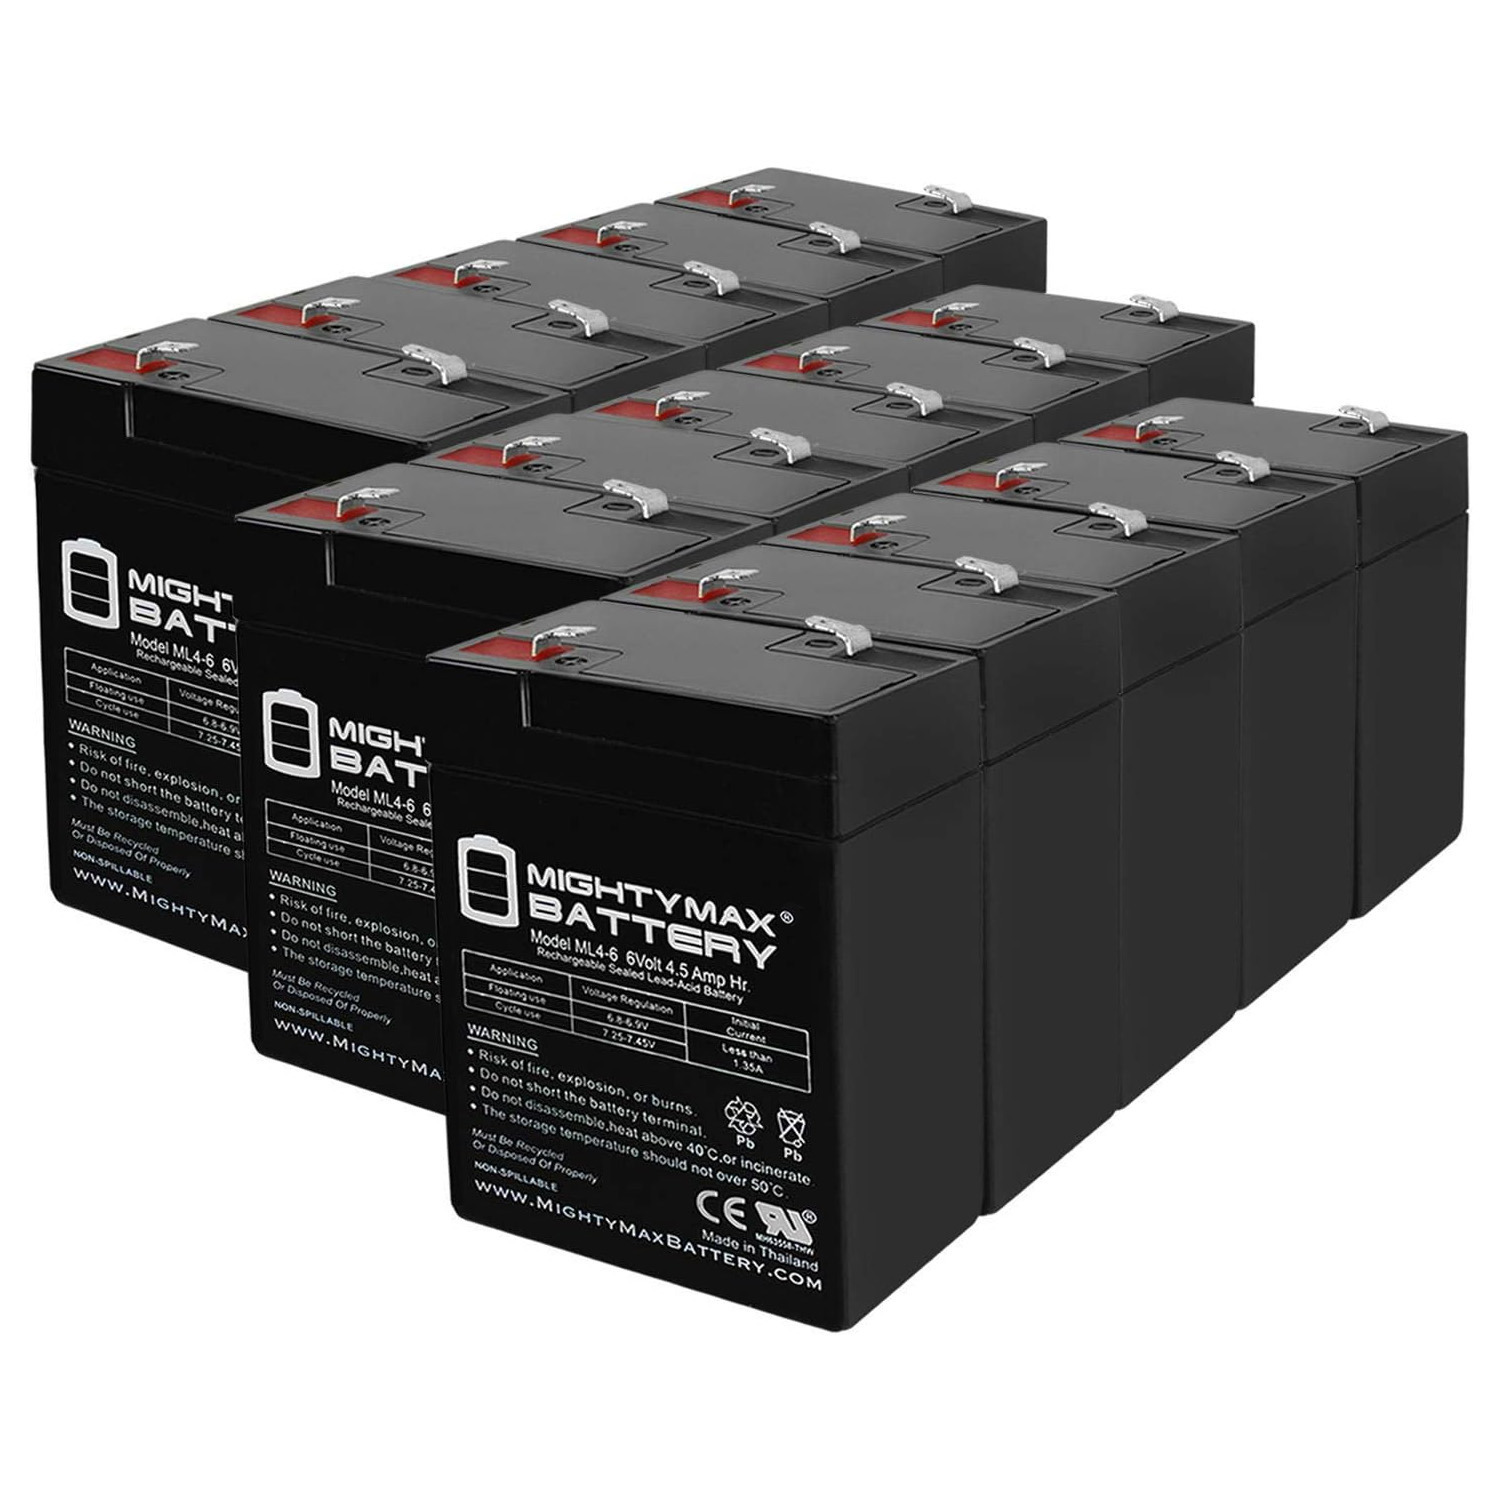 6V 4.5AH SLA Replacement Battery for Dual-Lite AGM HCXURB - 15 Pack